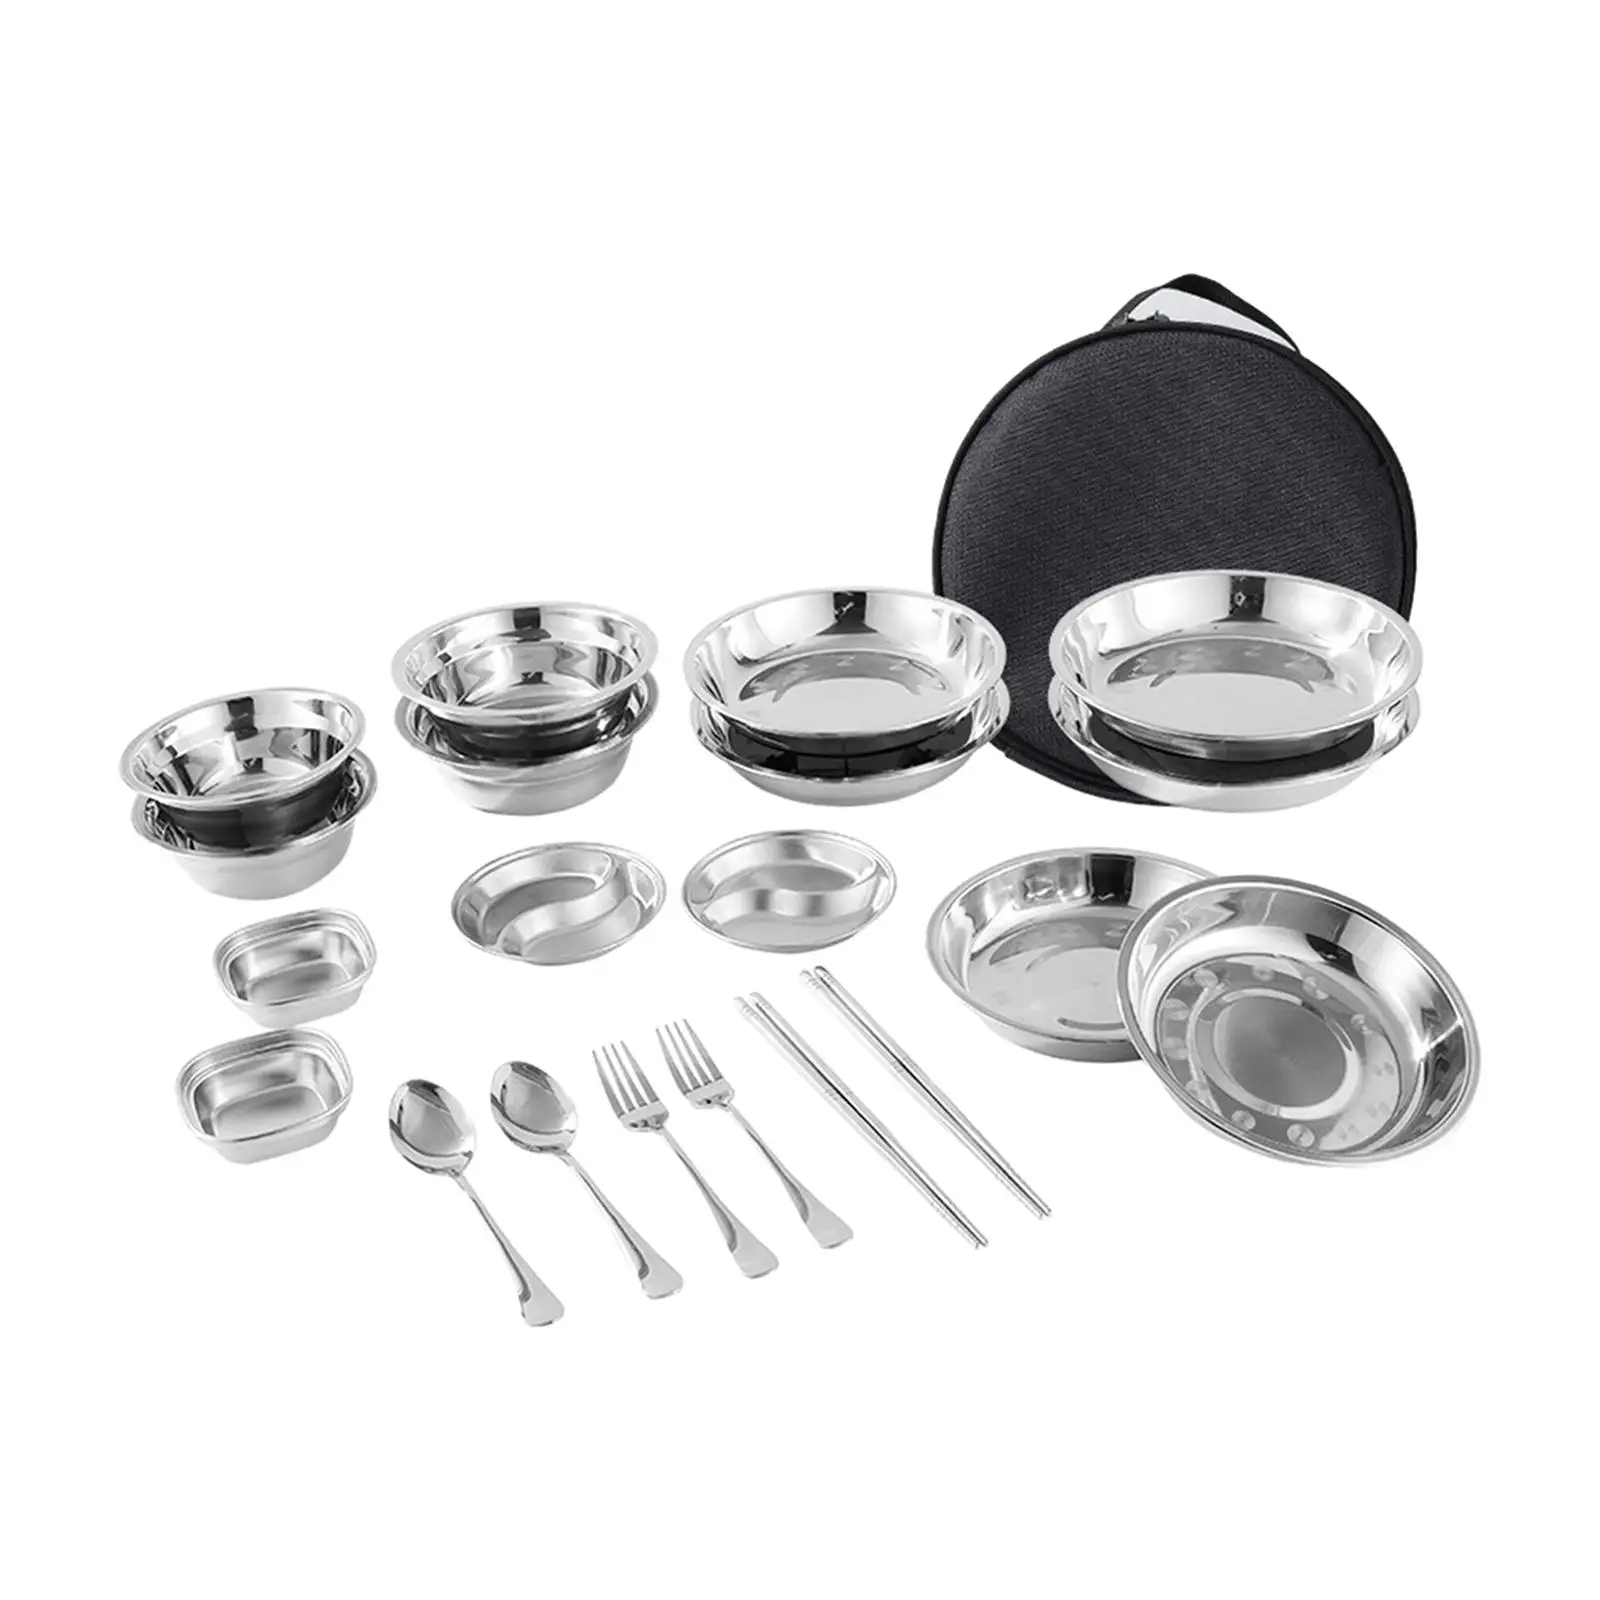 Stainless Steel Plates and Bowls Camping Dinnerware Tableware with Carry Bag